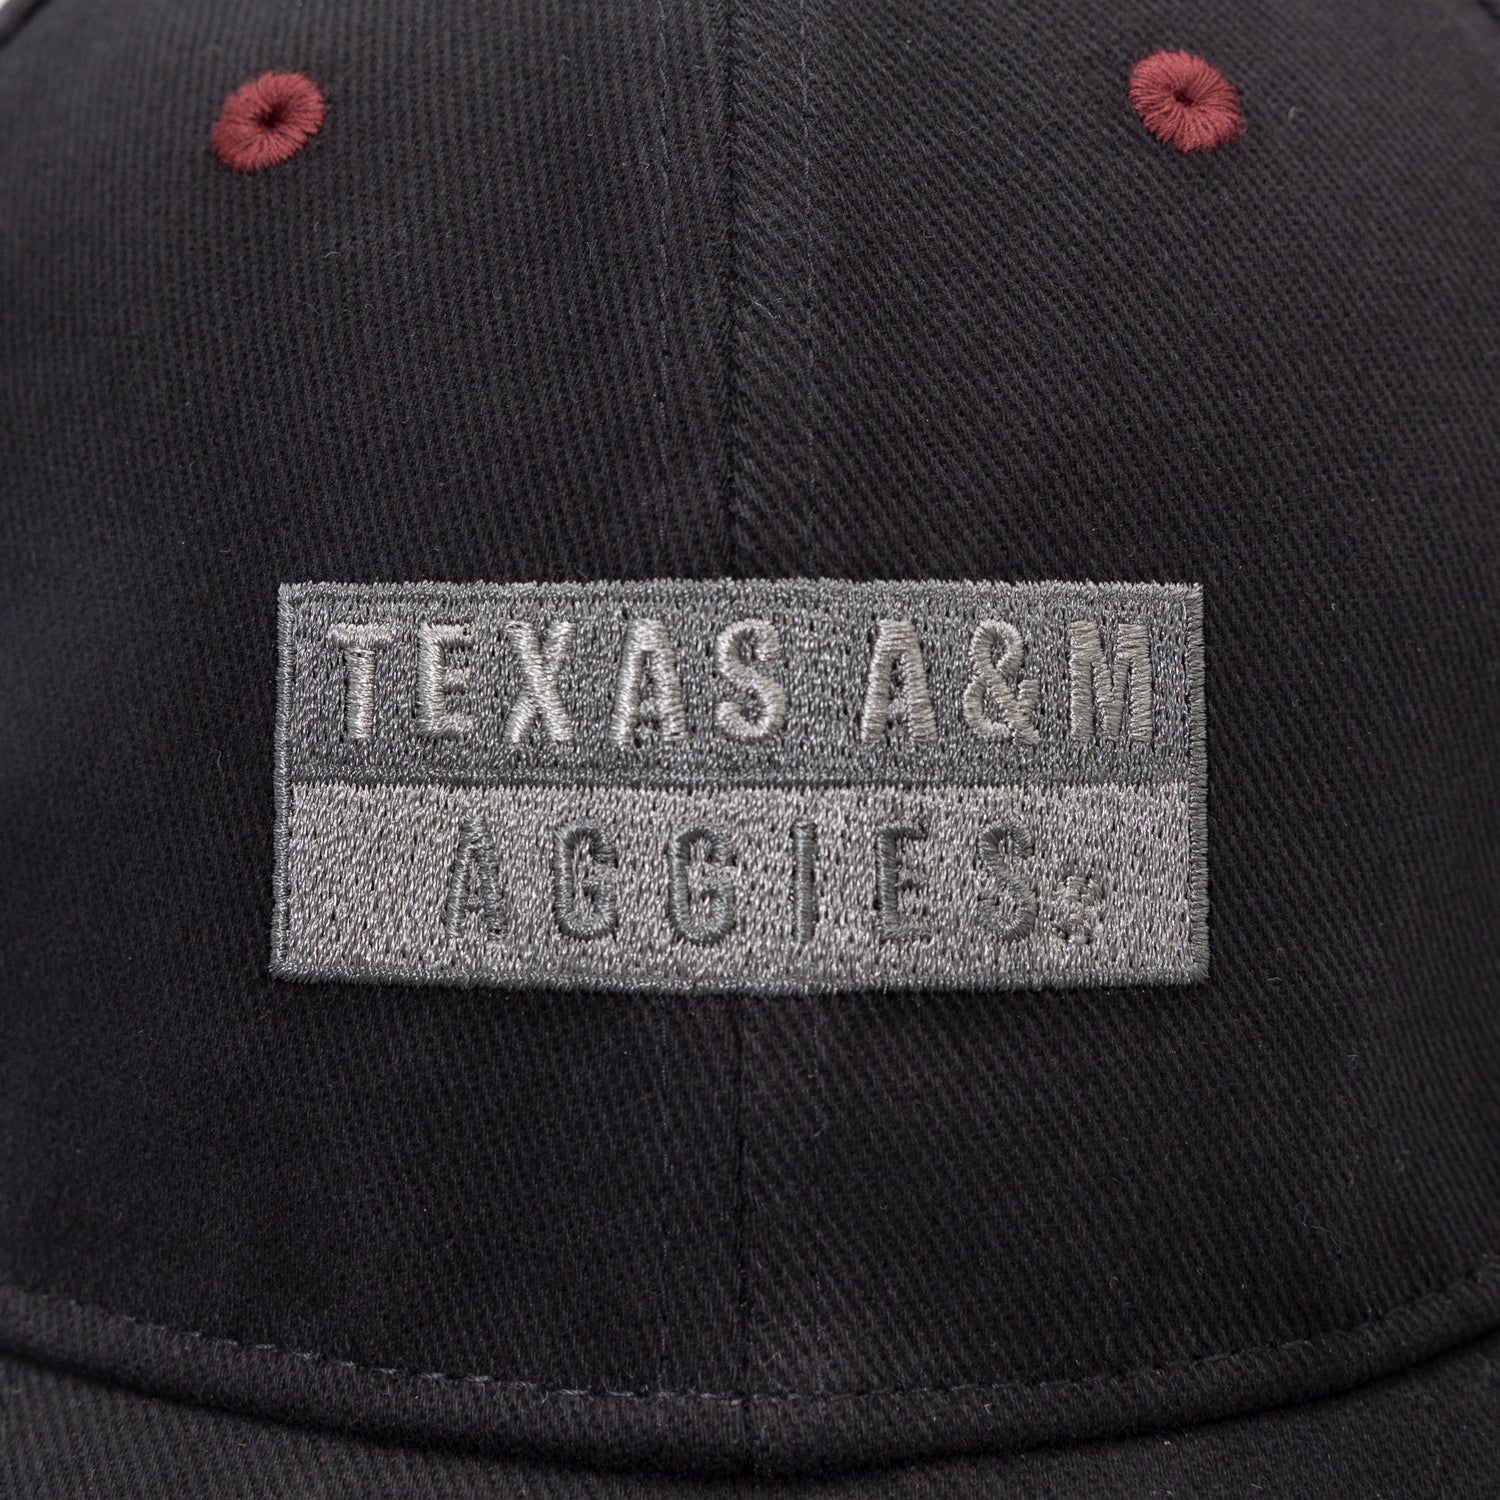 Texas AM Aggies Washed Cotton Slouch Hat